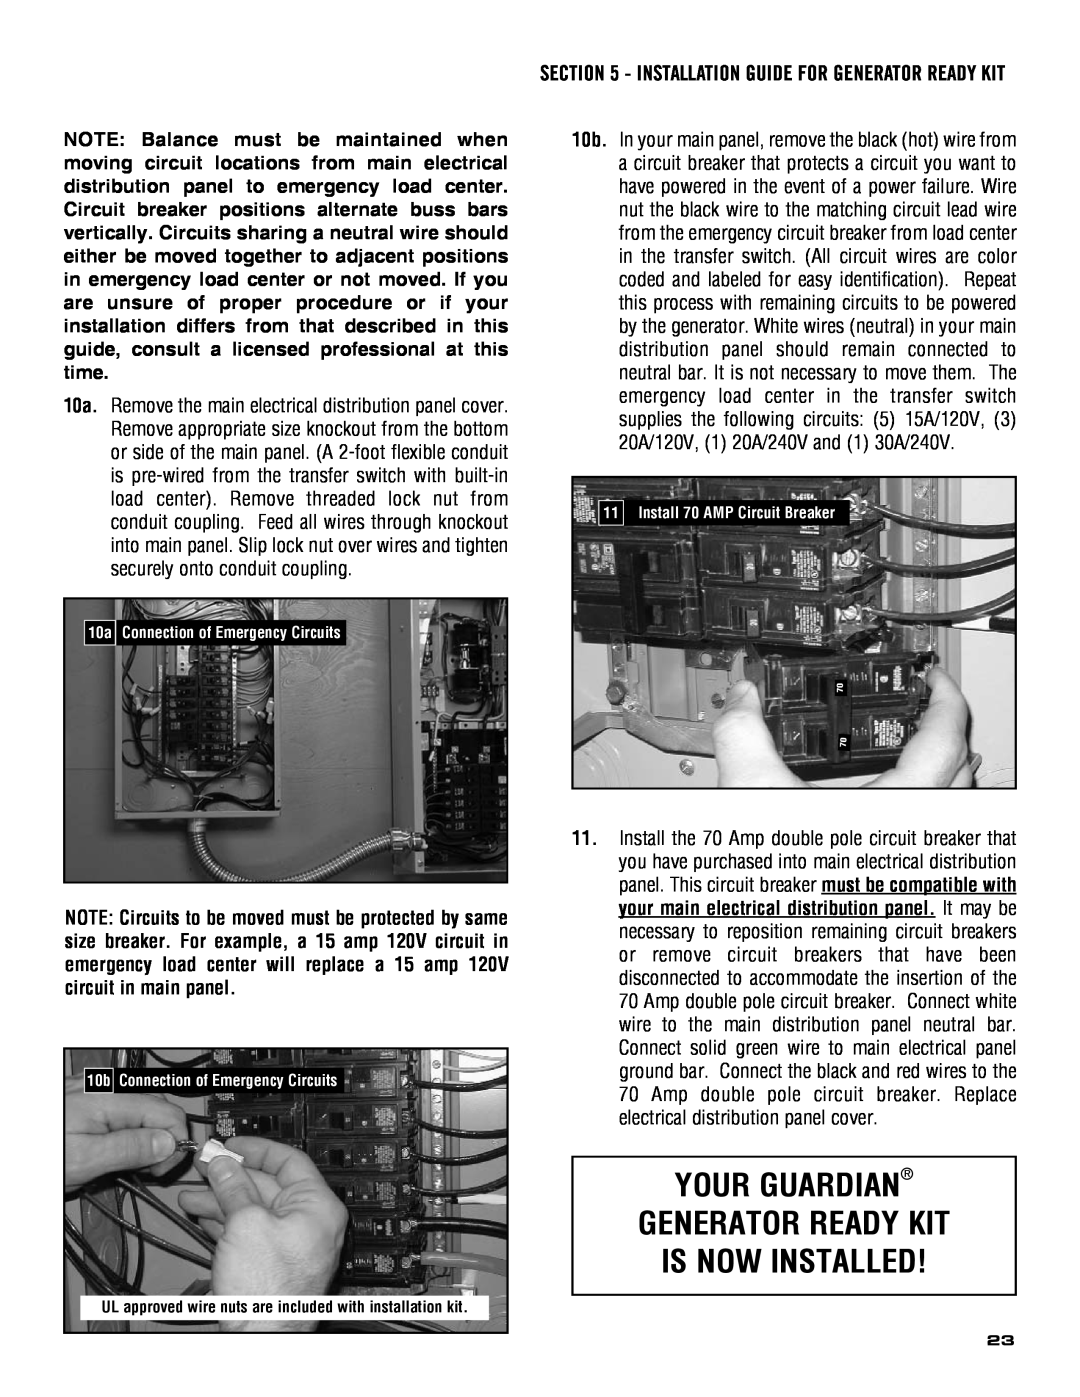 Guardian Technologies 5209 Your Guardian Generator Ready Kit Is Now Installed, Installation Guide For Generator Ready Kit 